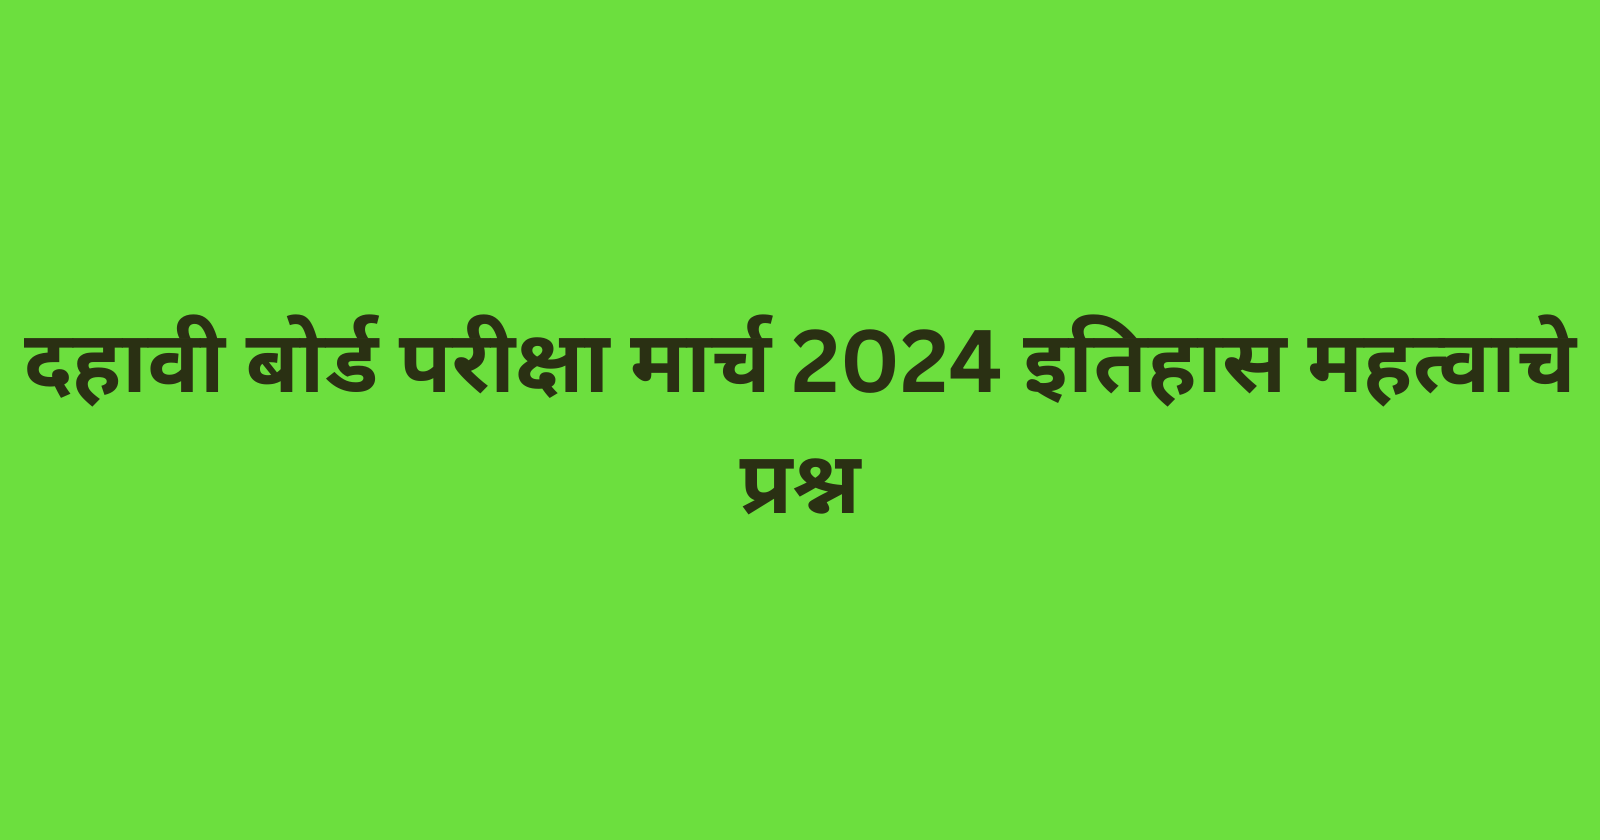 ssc board exam 2024 history imp question